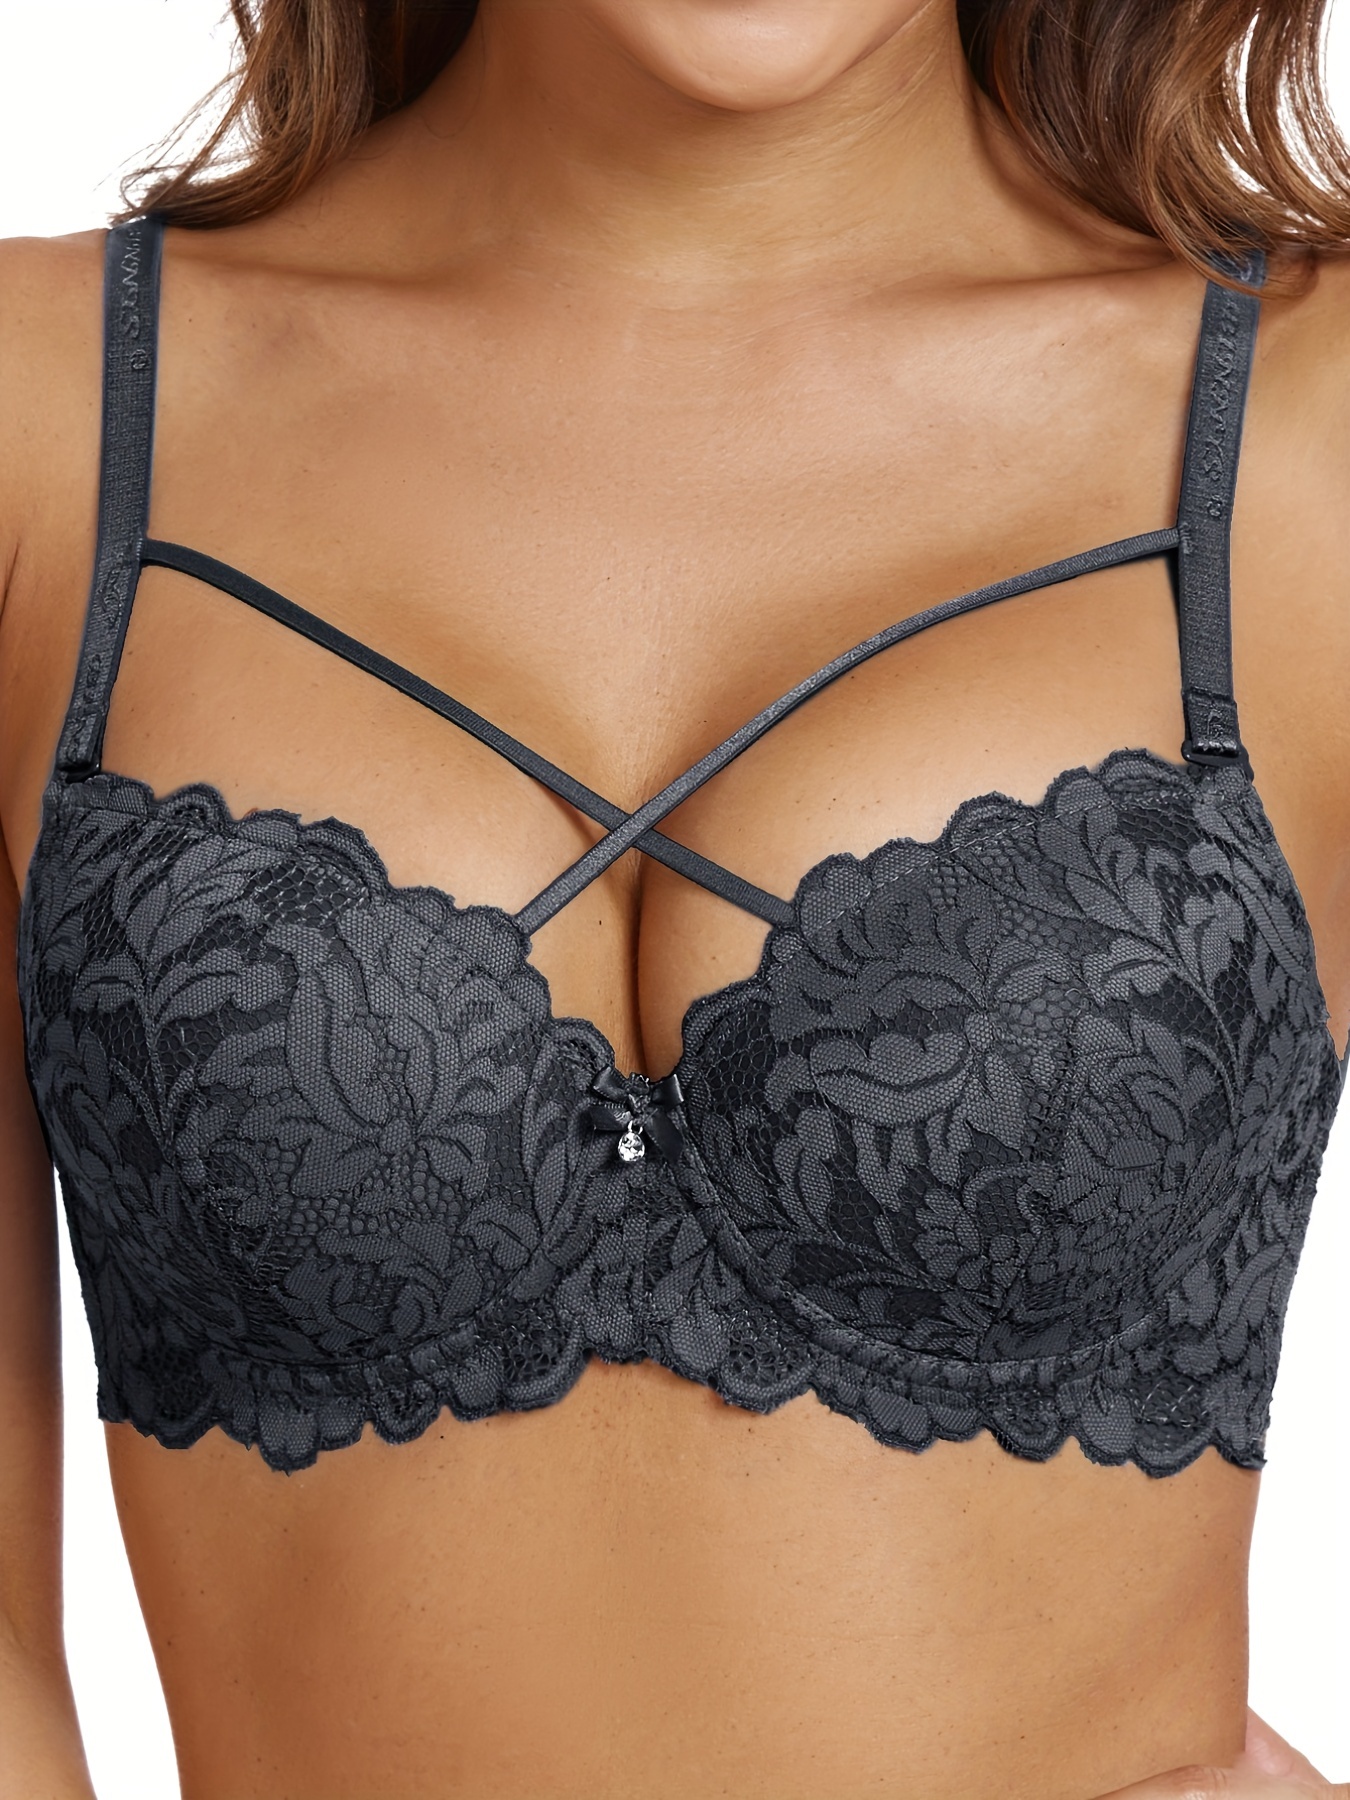 Lace Push-Up Bra With Criss Cross Details